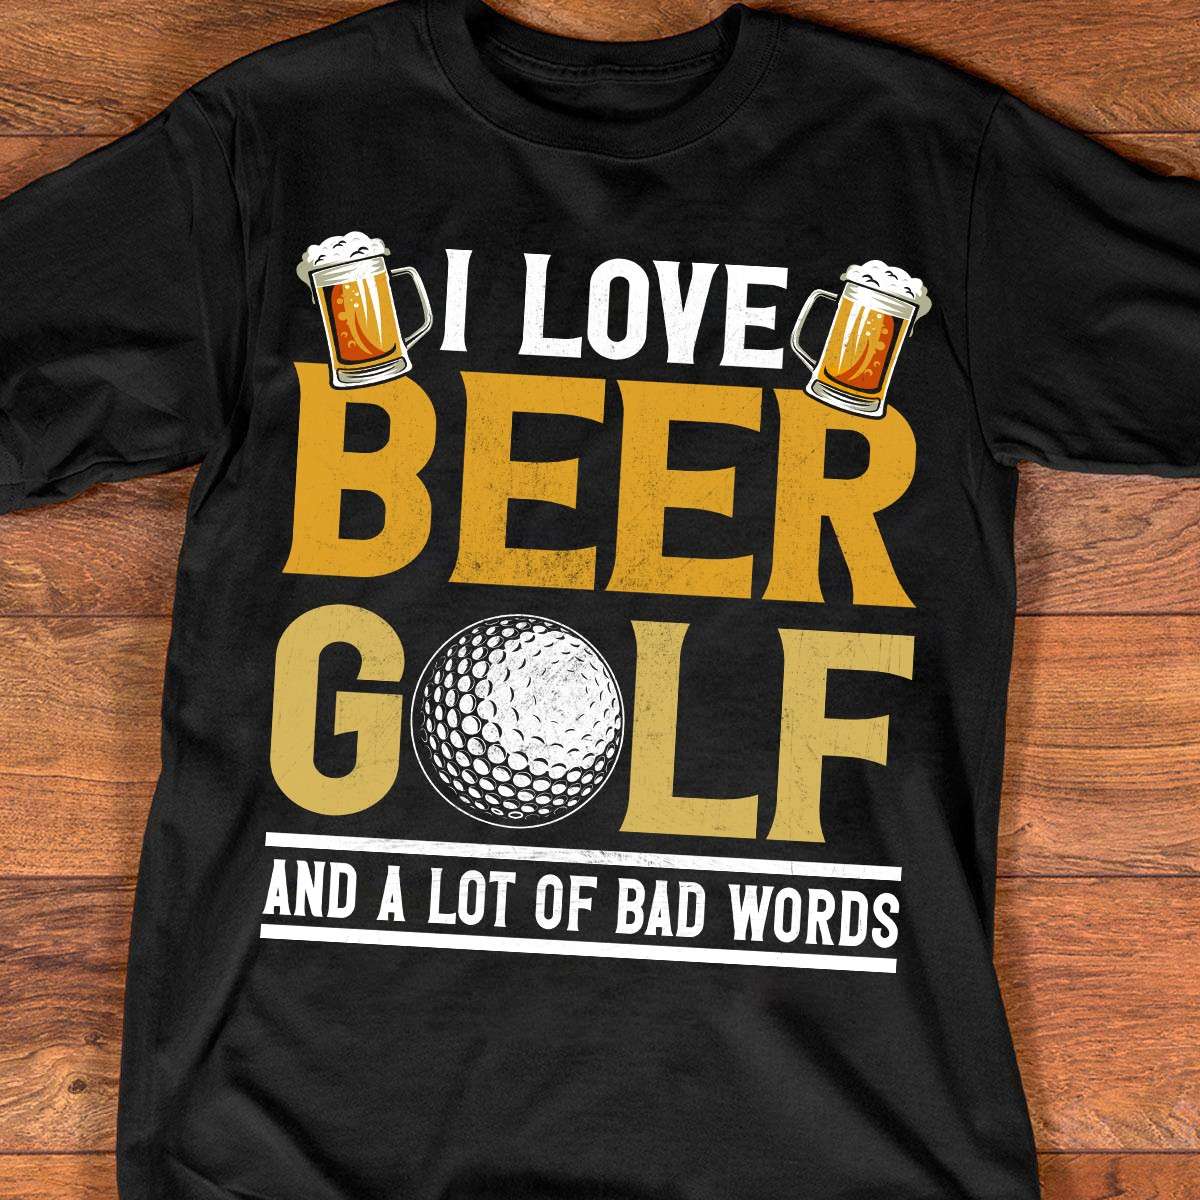 Golf Beer - I ove beer golf and a lot of bad words